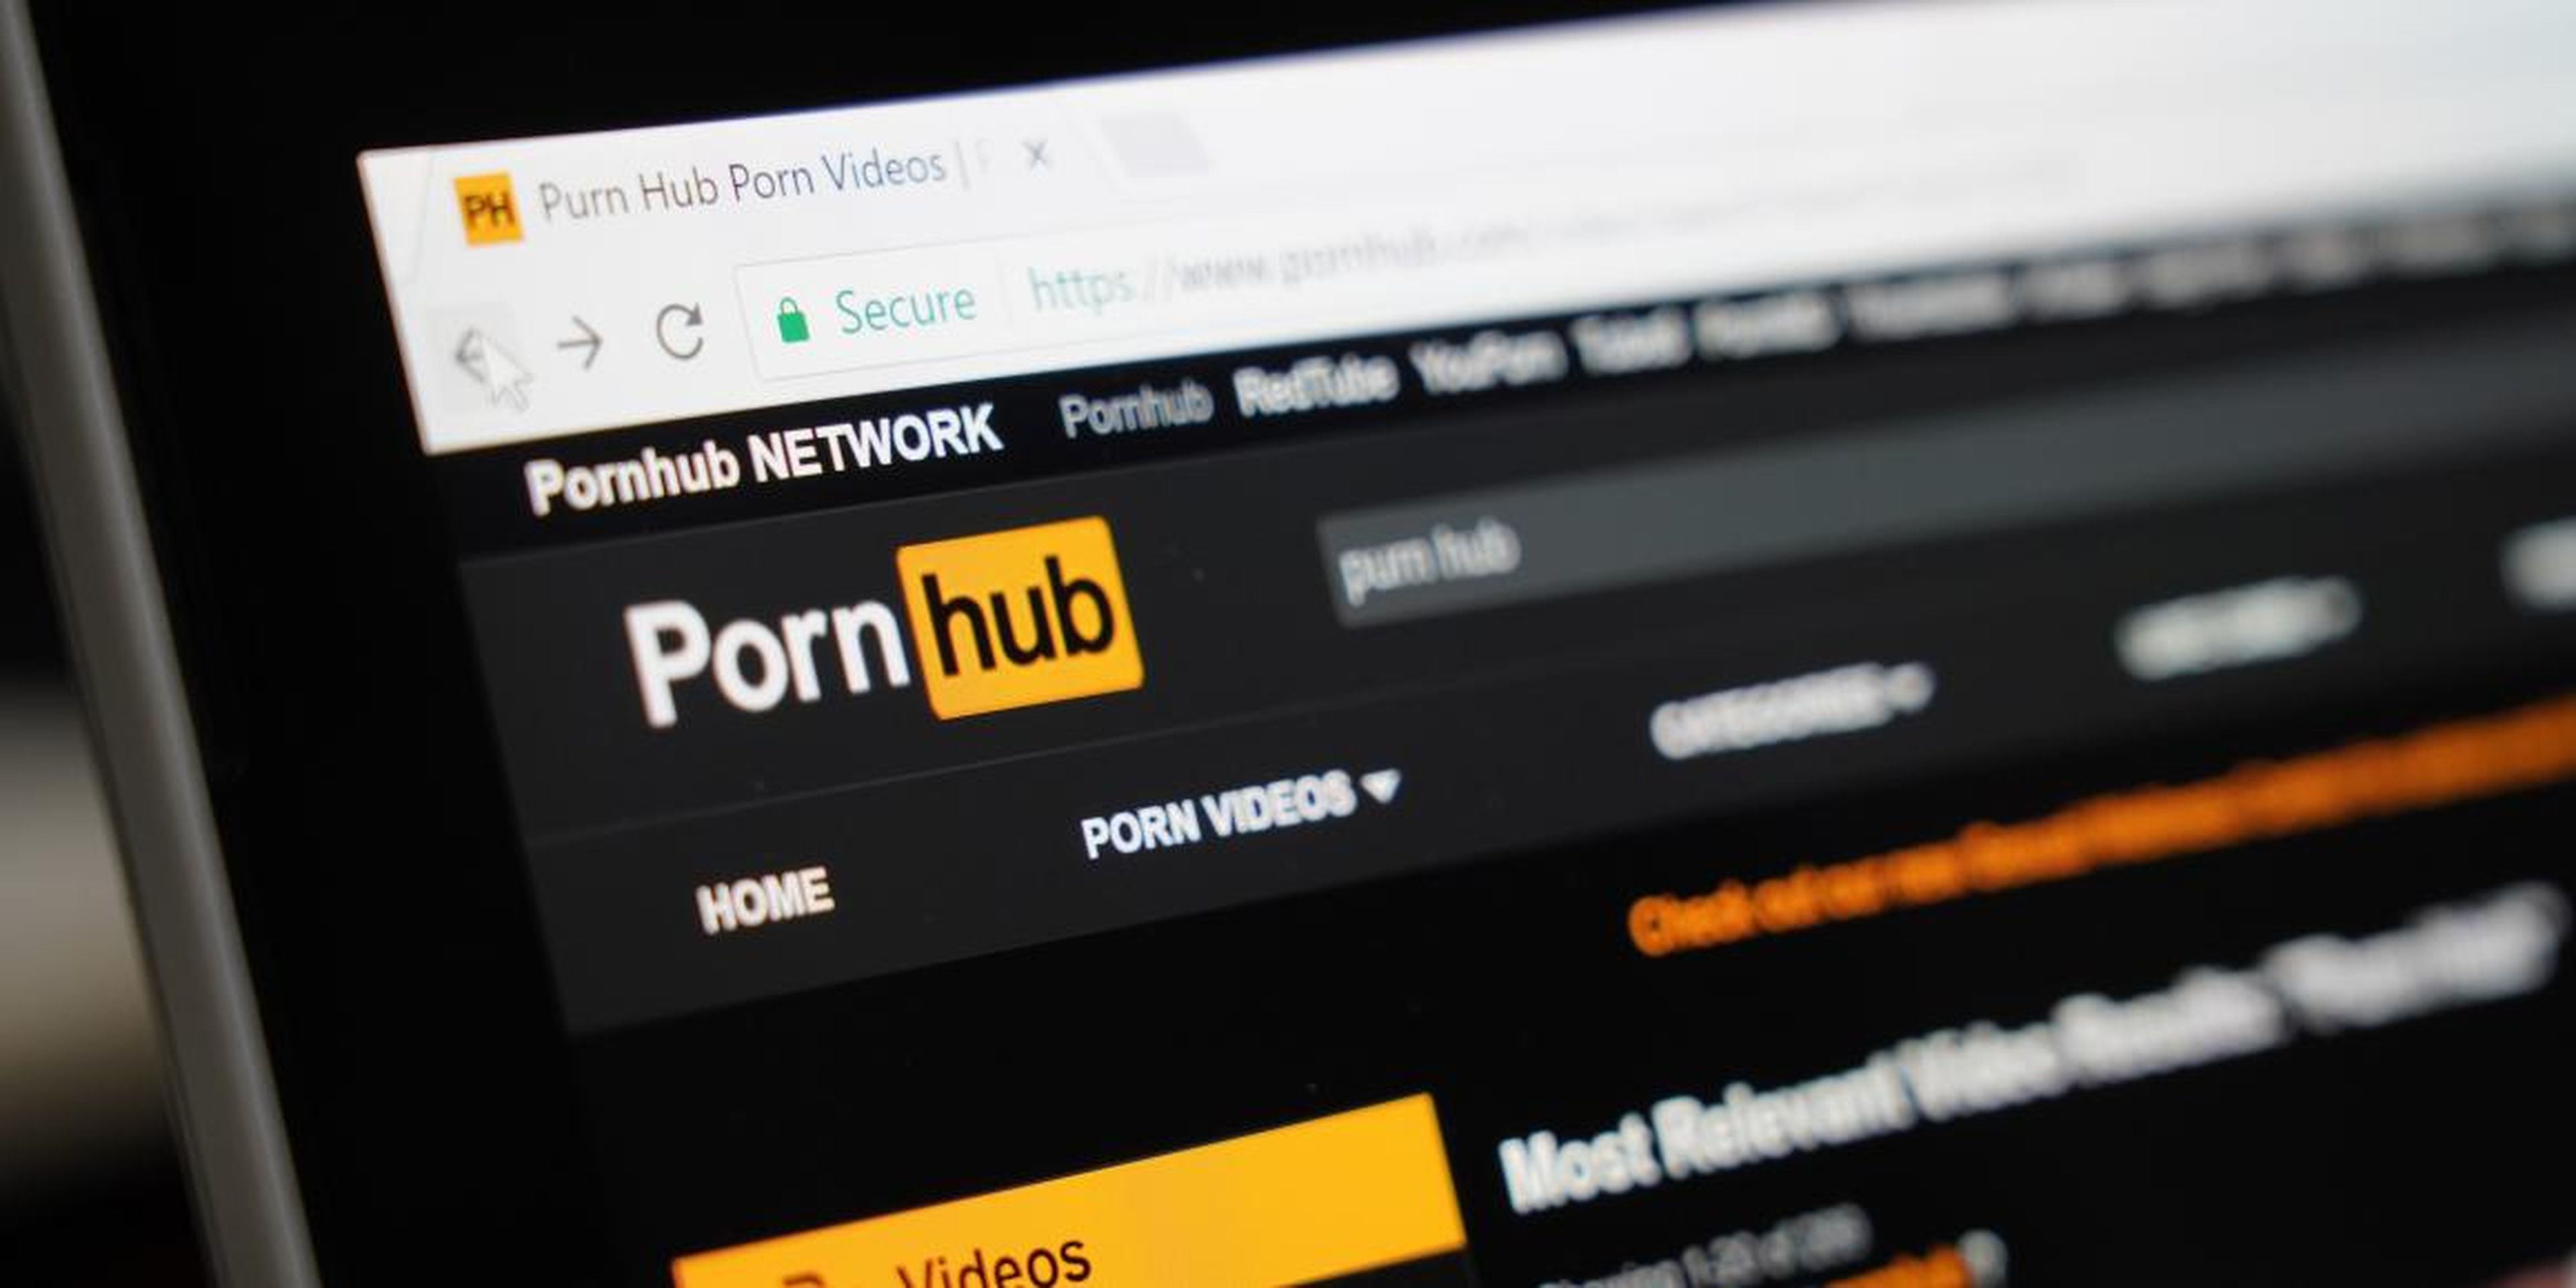 Pornhub, a popular pornography site, is one of the most visited websites in the US.